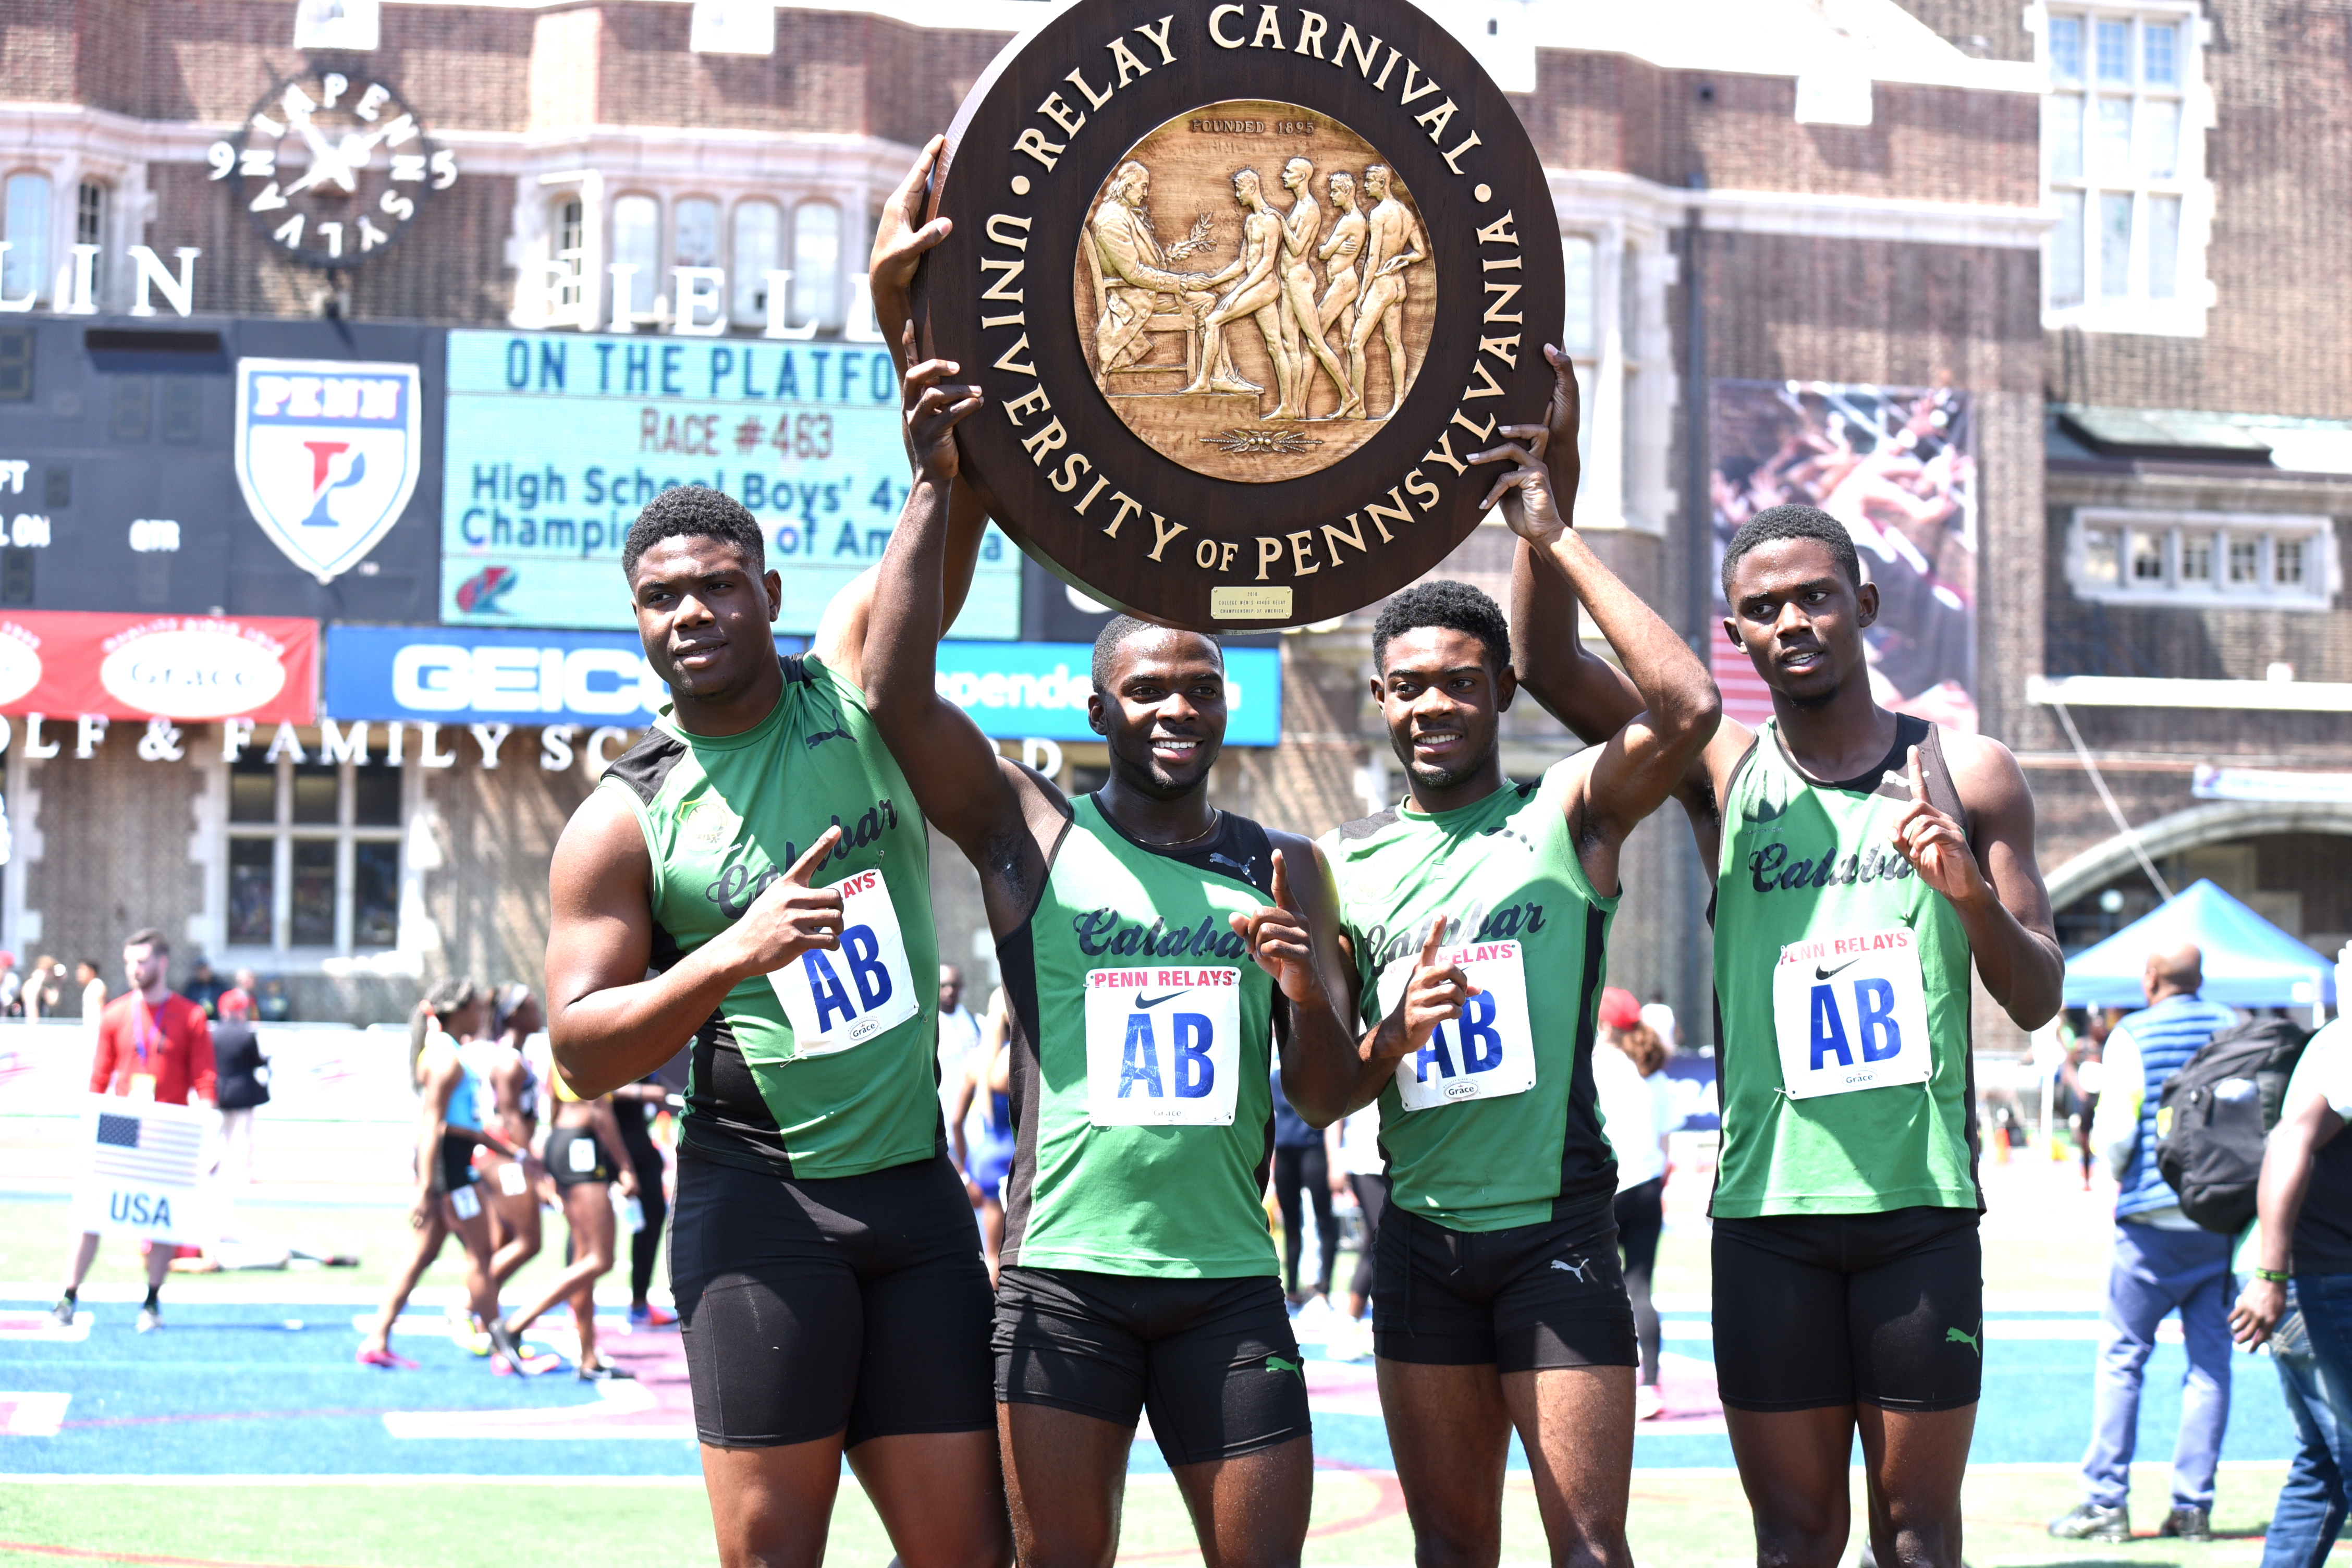 Calabar sizzles to 4x100m victory at Penn Relays